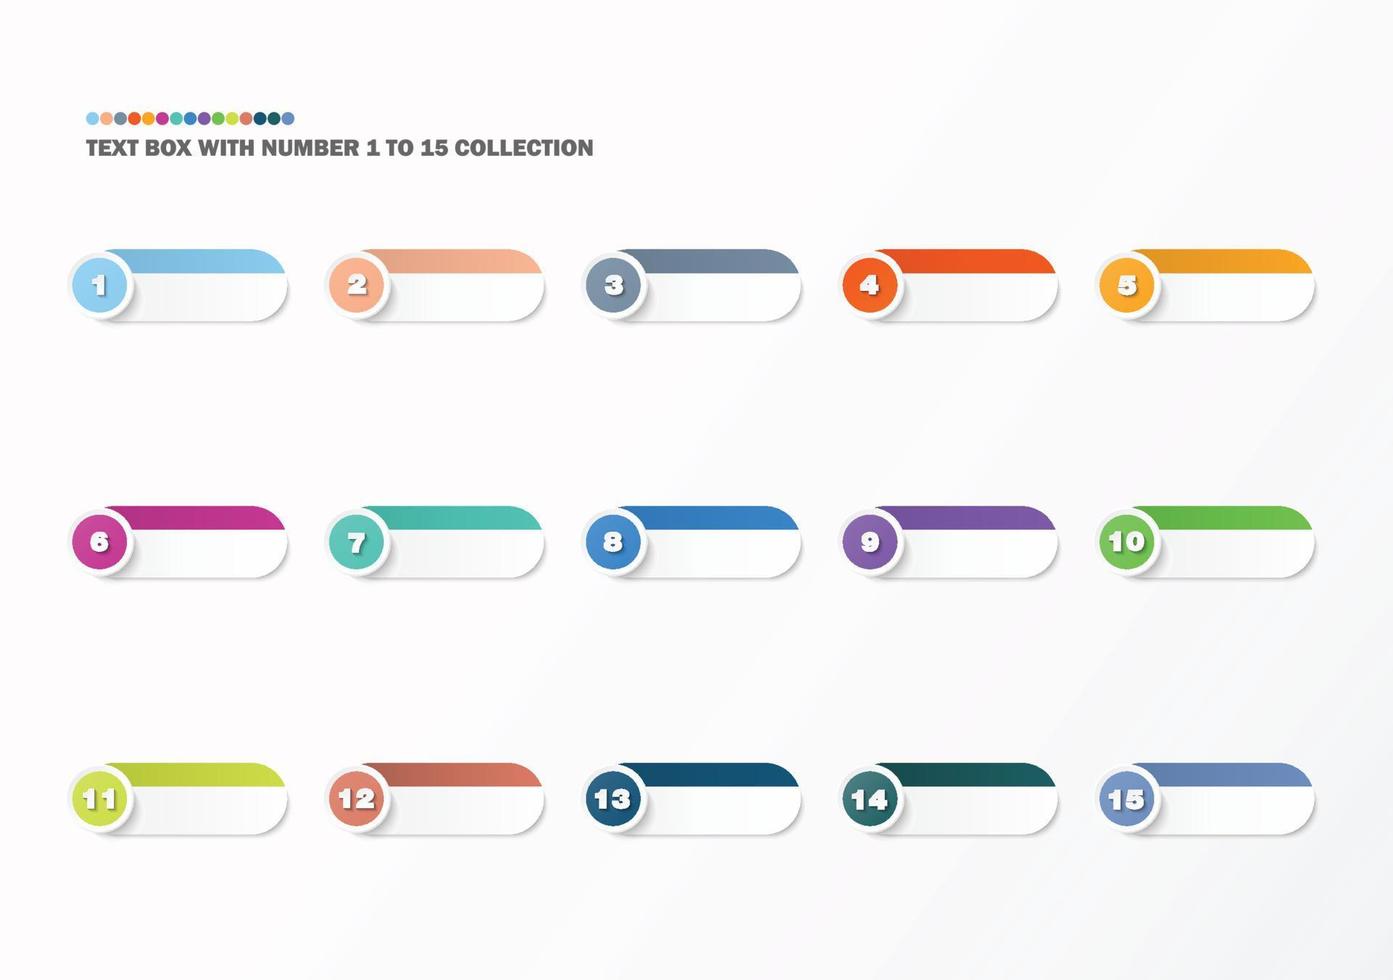 Bullet with number collection. Numbers from 1 to 15. Infographic buttons and points. vector